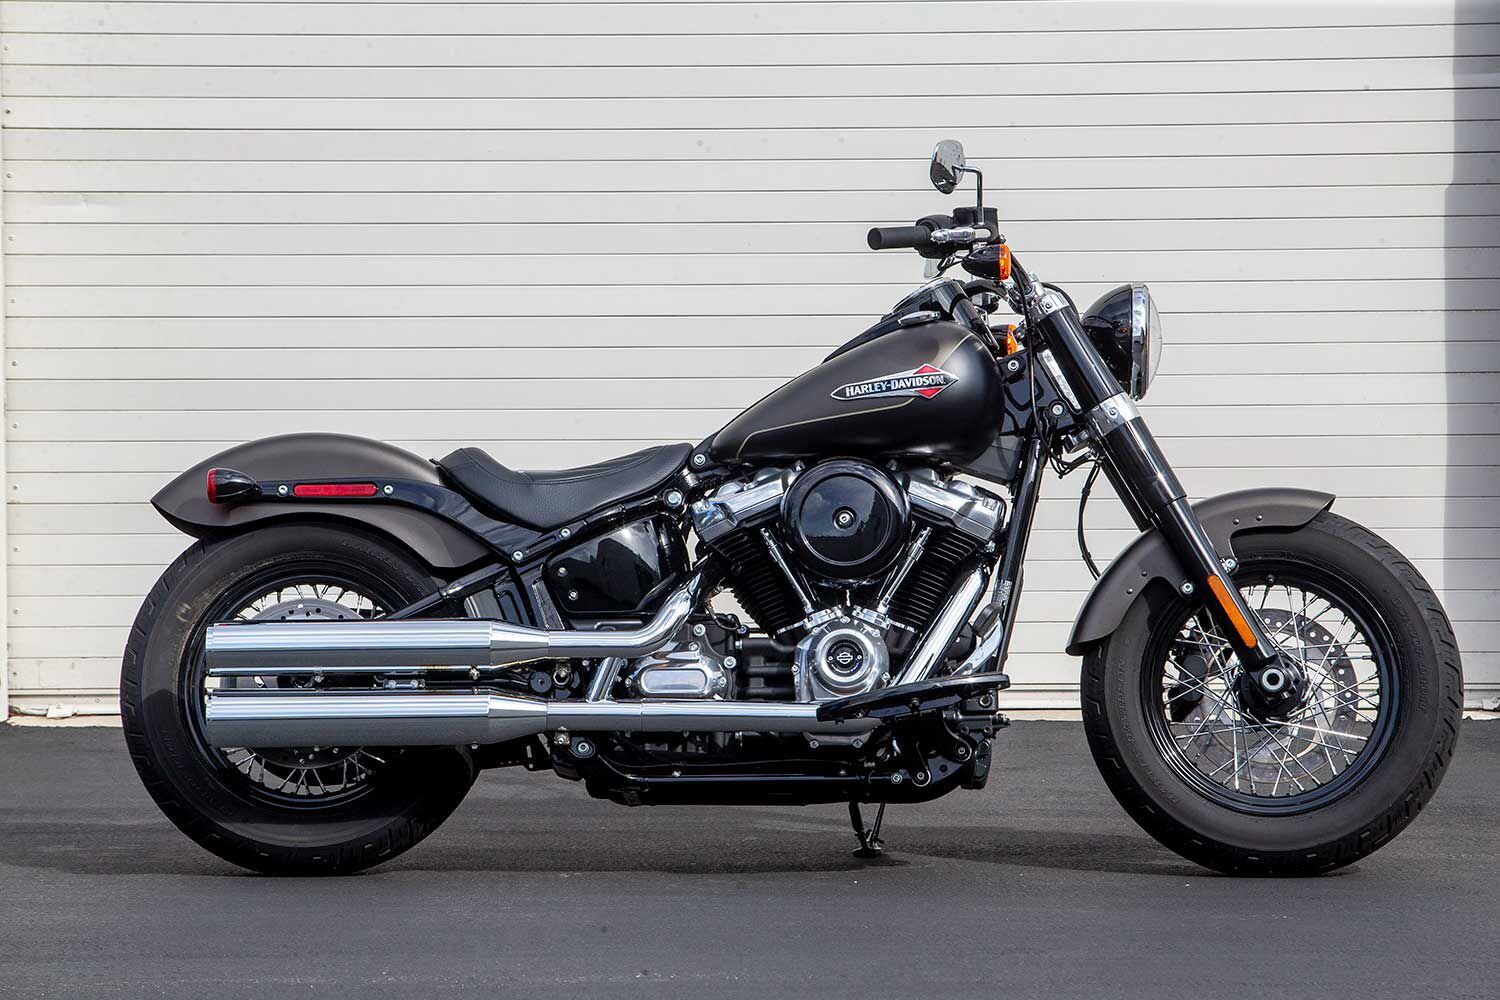 The Harley-Davidson Softail Slim is an enticing option as an around-town cruiser, and sits as the second least expensive model of the H-D cruiser lineup with a starting MSRP of $15,999.